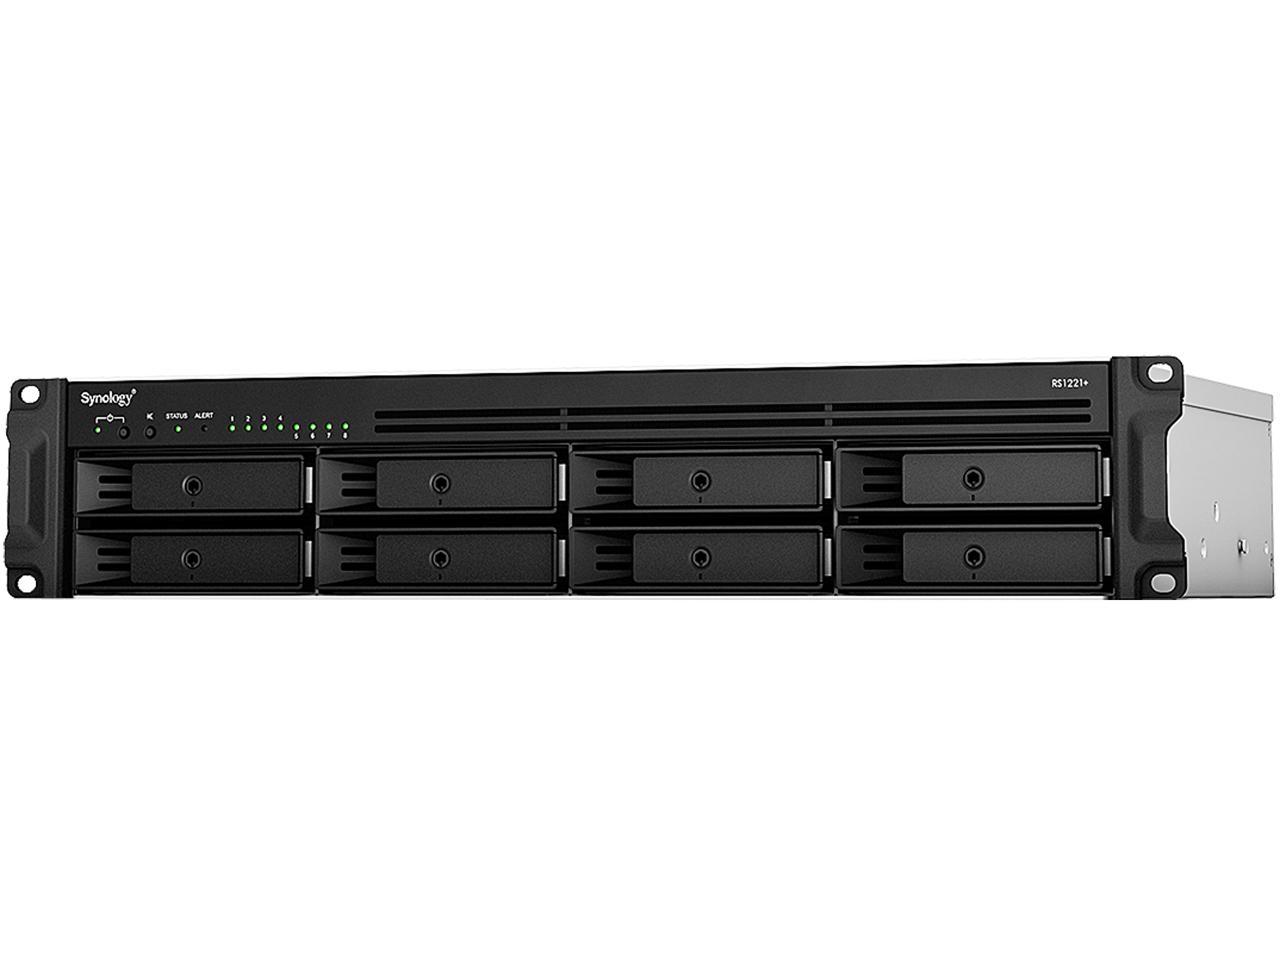 Synology RS1221+ RackStation with 4GB RAM 800GB (2x400GB) Cache, 1-Port 10GbE Adapter and 48TB (8 x 6TB) of Synology Plus NAS Drives Fully Assembled and Tested